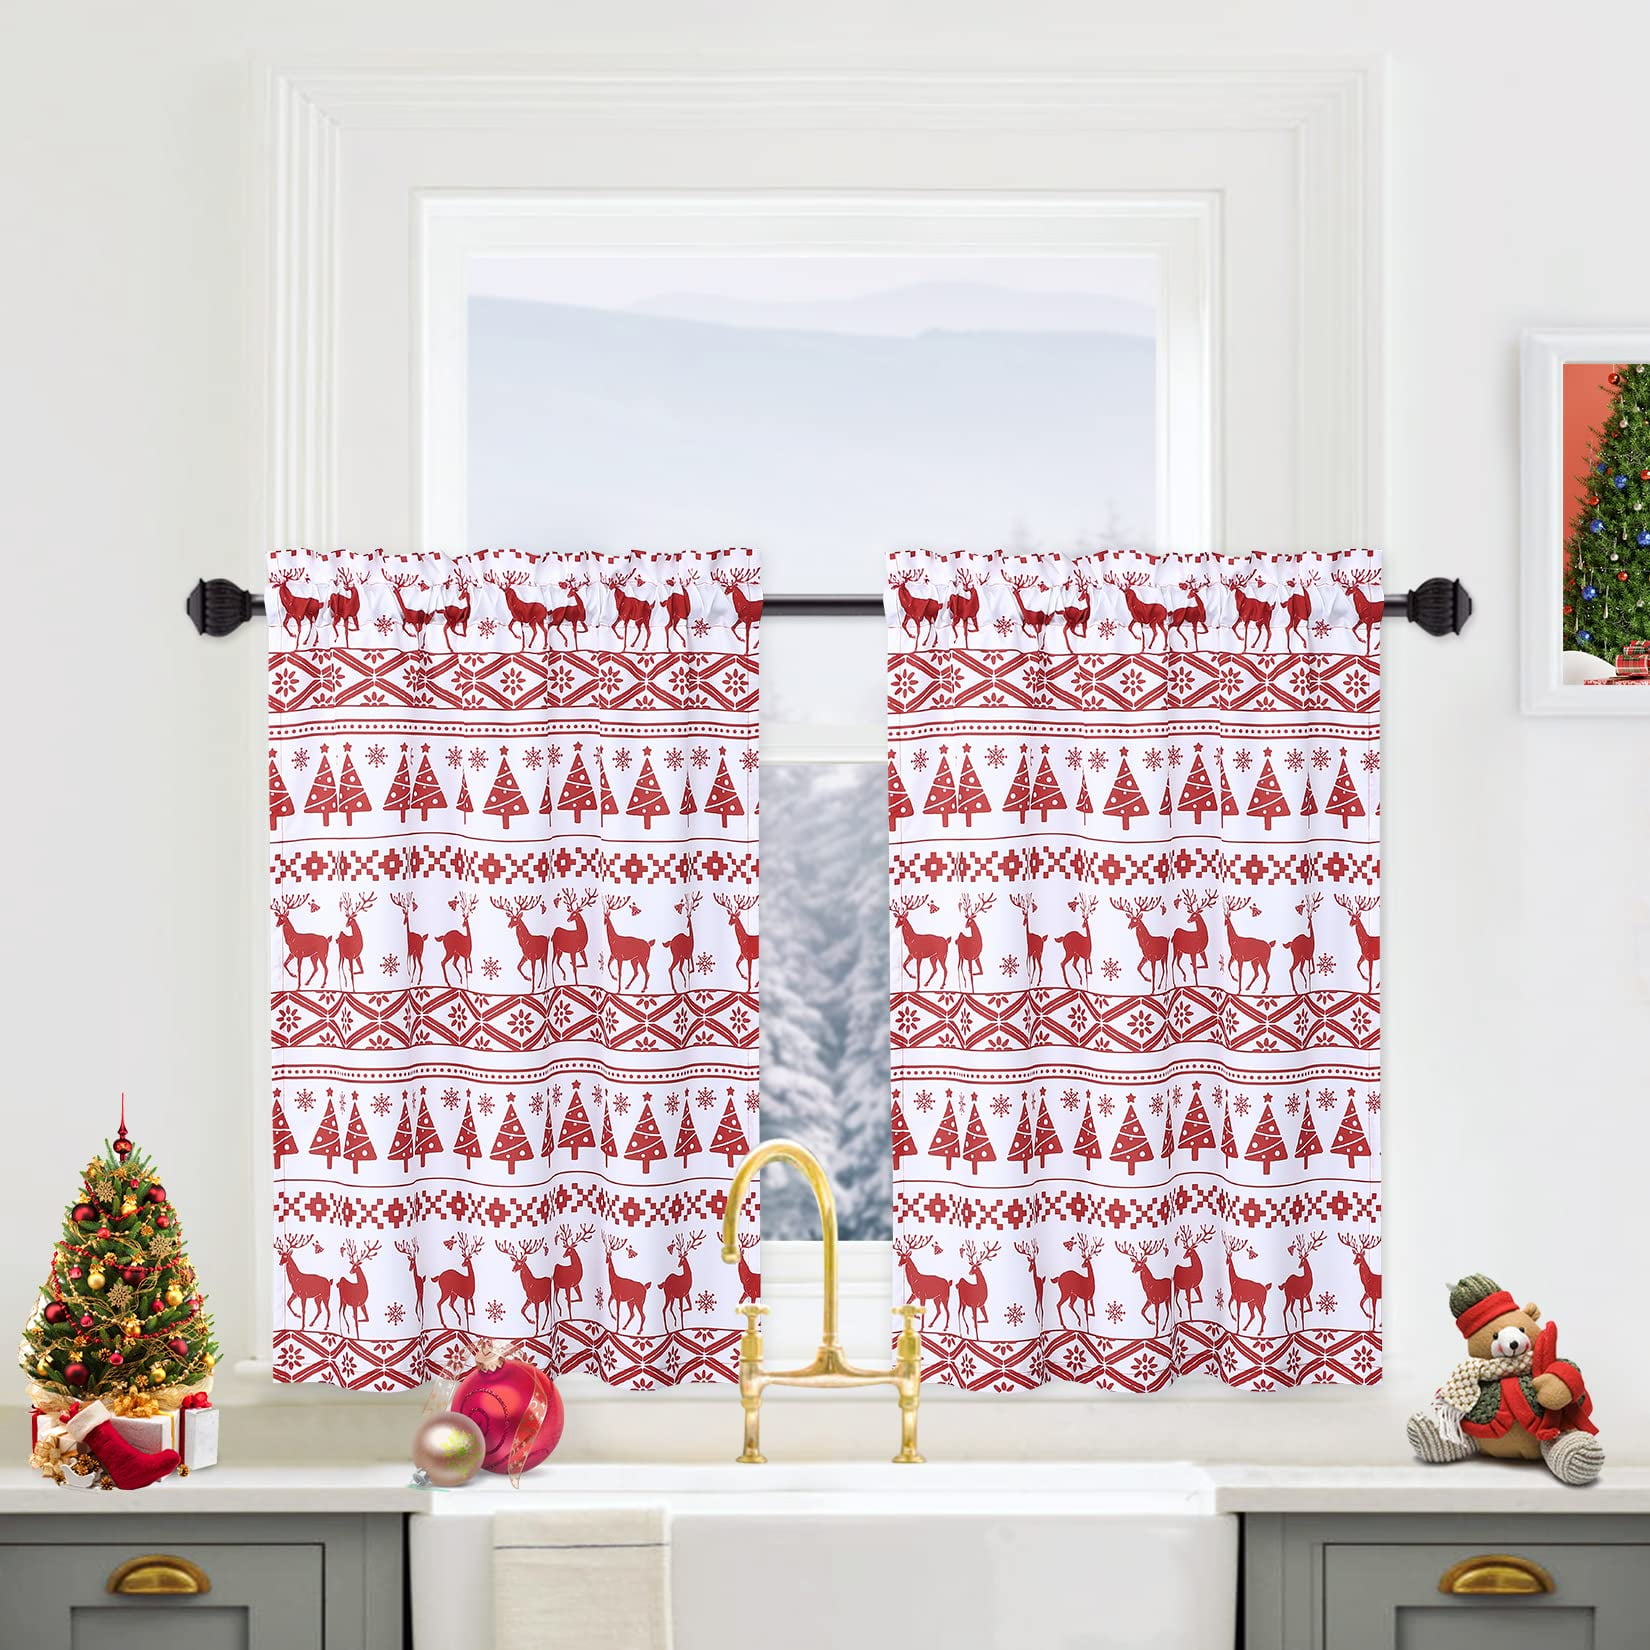 Christmas Tree And Deer Curtain For Bathroom Boho Style Curtains Windows Xmas Home Decorations Kitchen Cafe 26 X 30 One Panel White Com